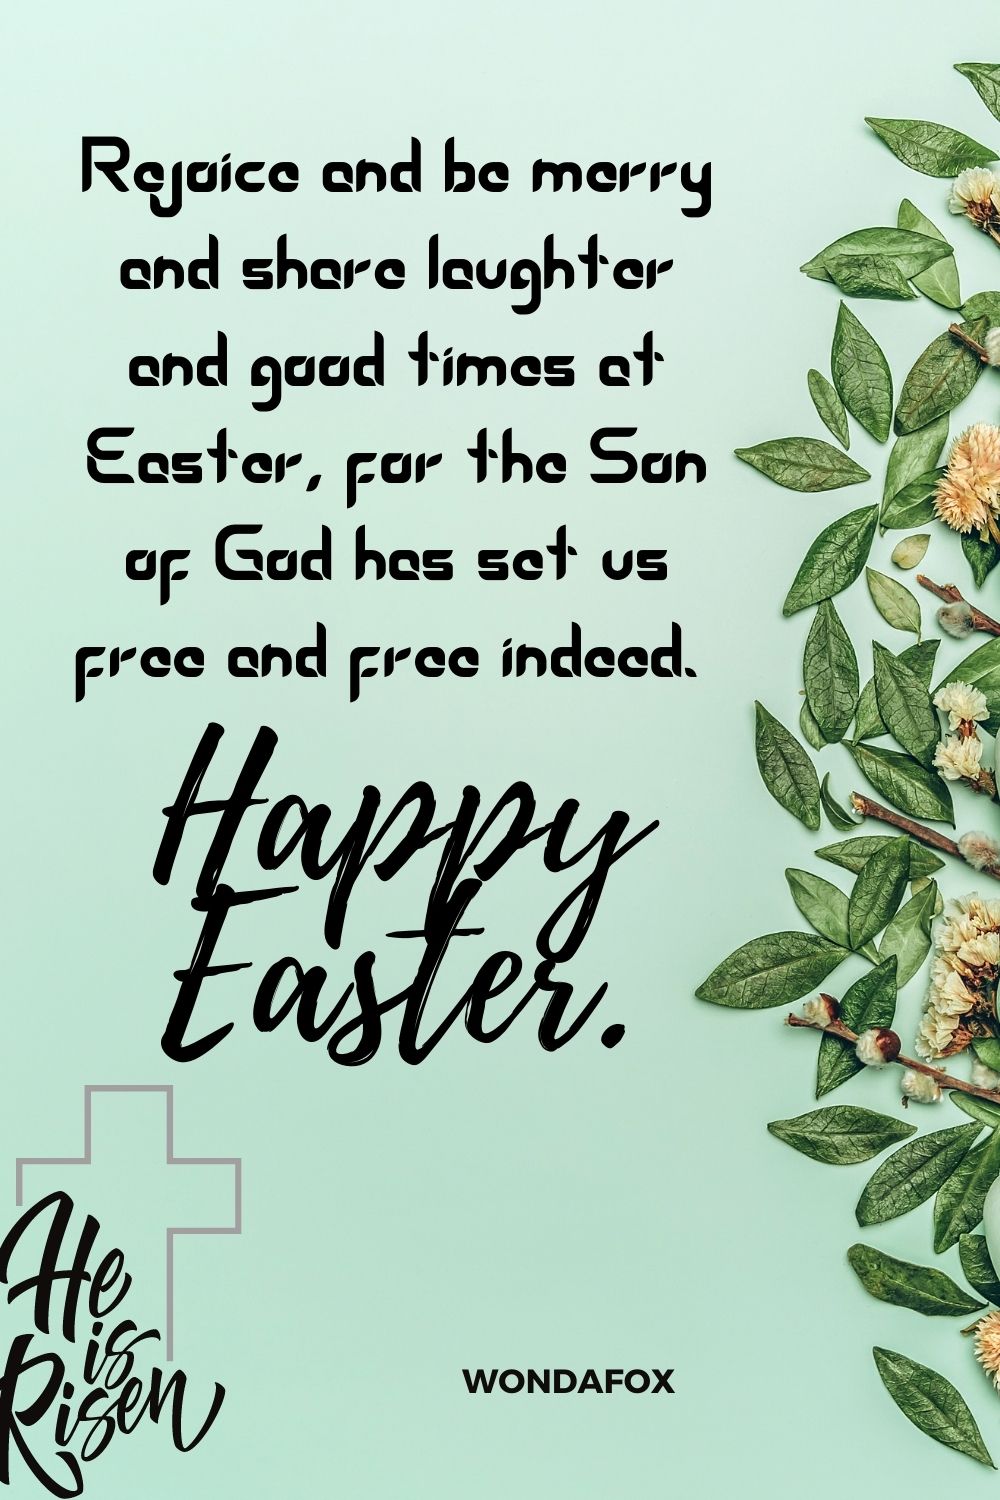 Rejoice and be merry and share laughter and good times at Easter, for the Son of God has set us free and free indeed. Happy Easter.